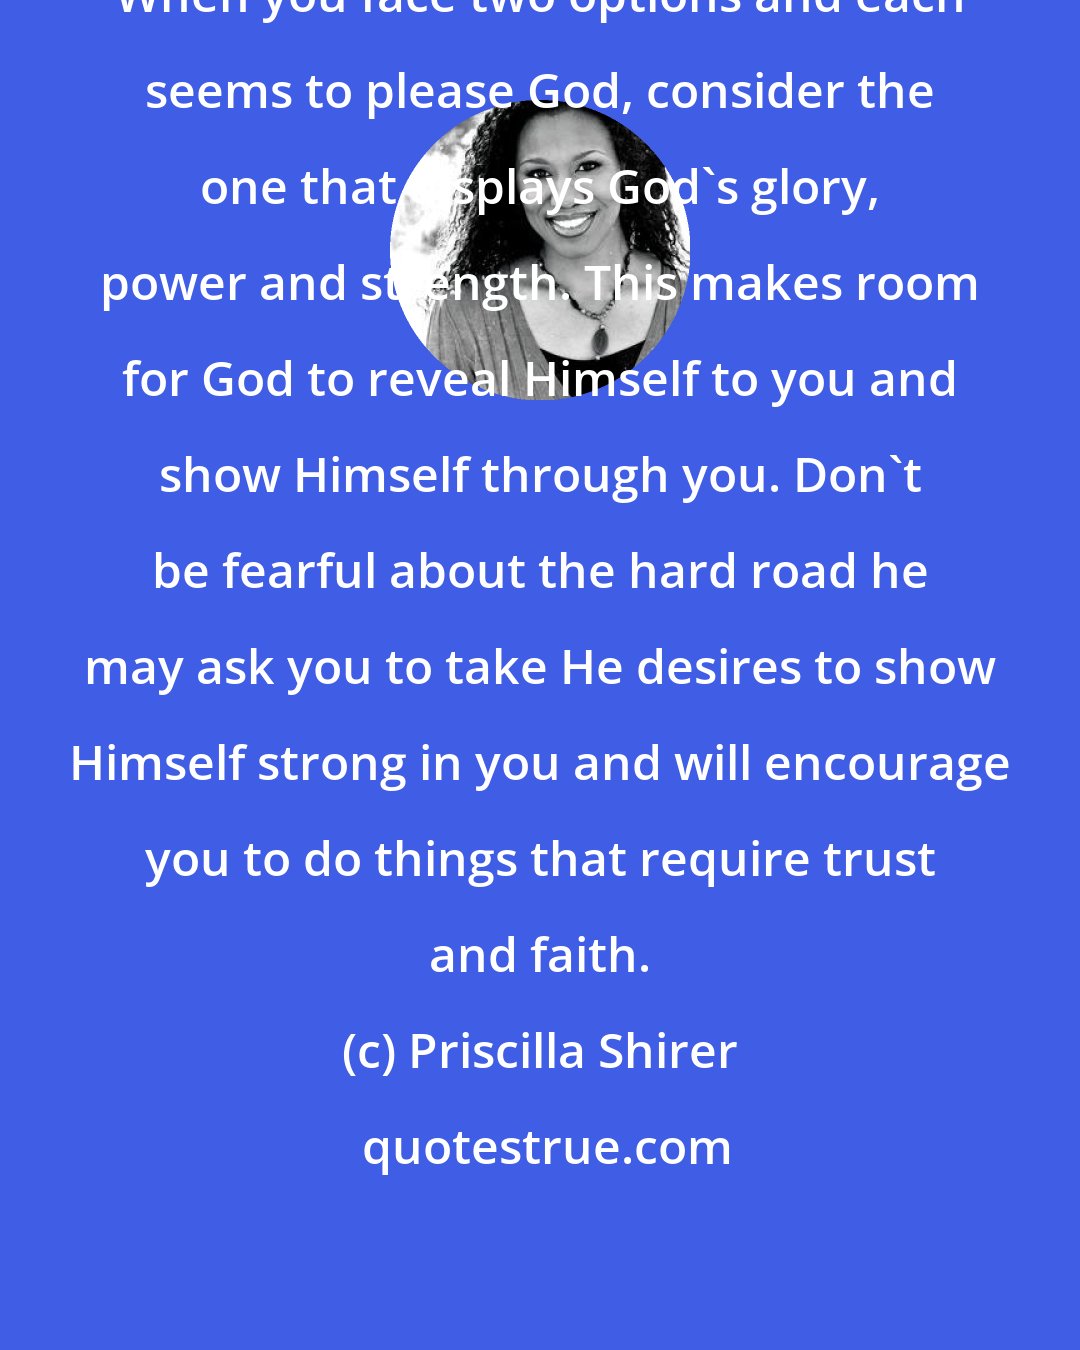 Priscilla Shirer: When you face two options and each seems to please God, consider the one that displays God's glory, power and strength. This makes room for God to reveal Himself to you and show Himself through you. Don't be fearful about the hard road he may ask you to take He desires to show Himself strong in you and will encourage you to do things that require trust and faith.